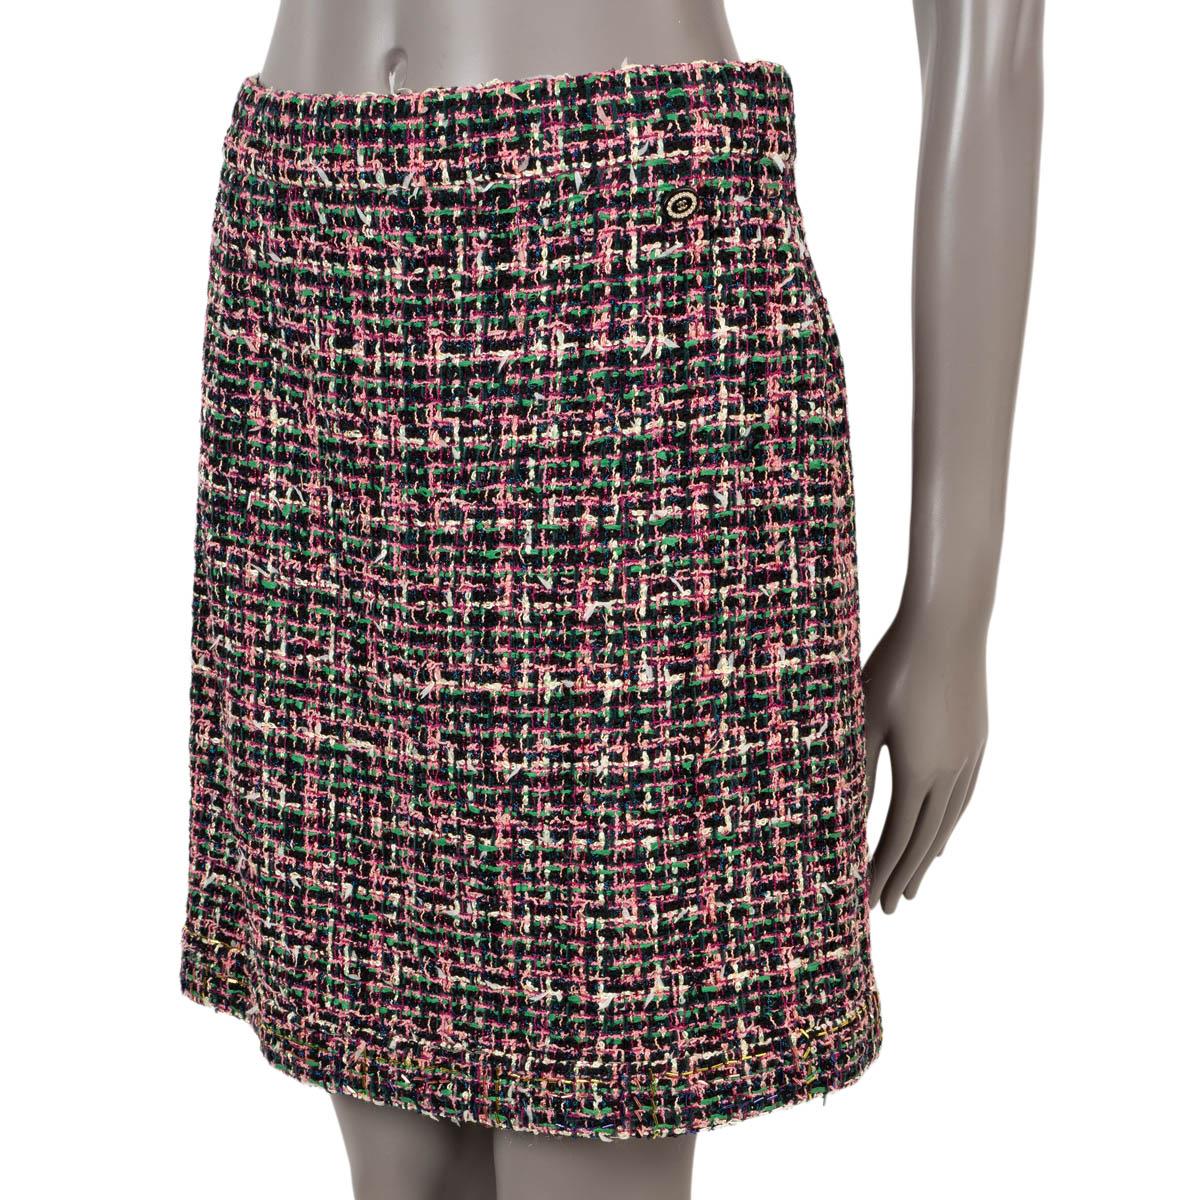 100% authentic Chanel below-knee tweed skirt in pink, black, green, blue and yellow polyamide (55%), polyester (14%), viscose (11%), cotton (10%), wool (6%) and polyurethane (4%). Lined in black silk (100%). The hem is embellished with gold, silver,